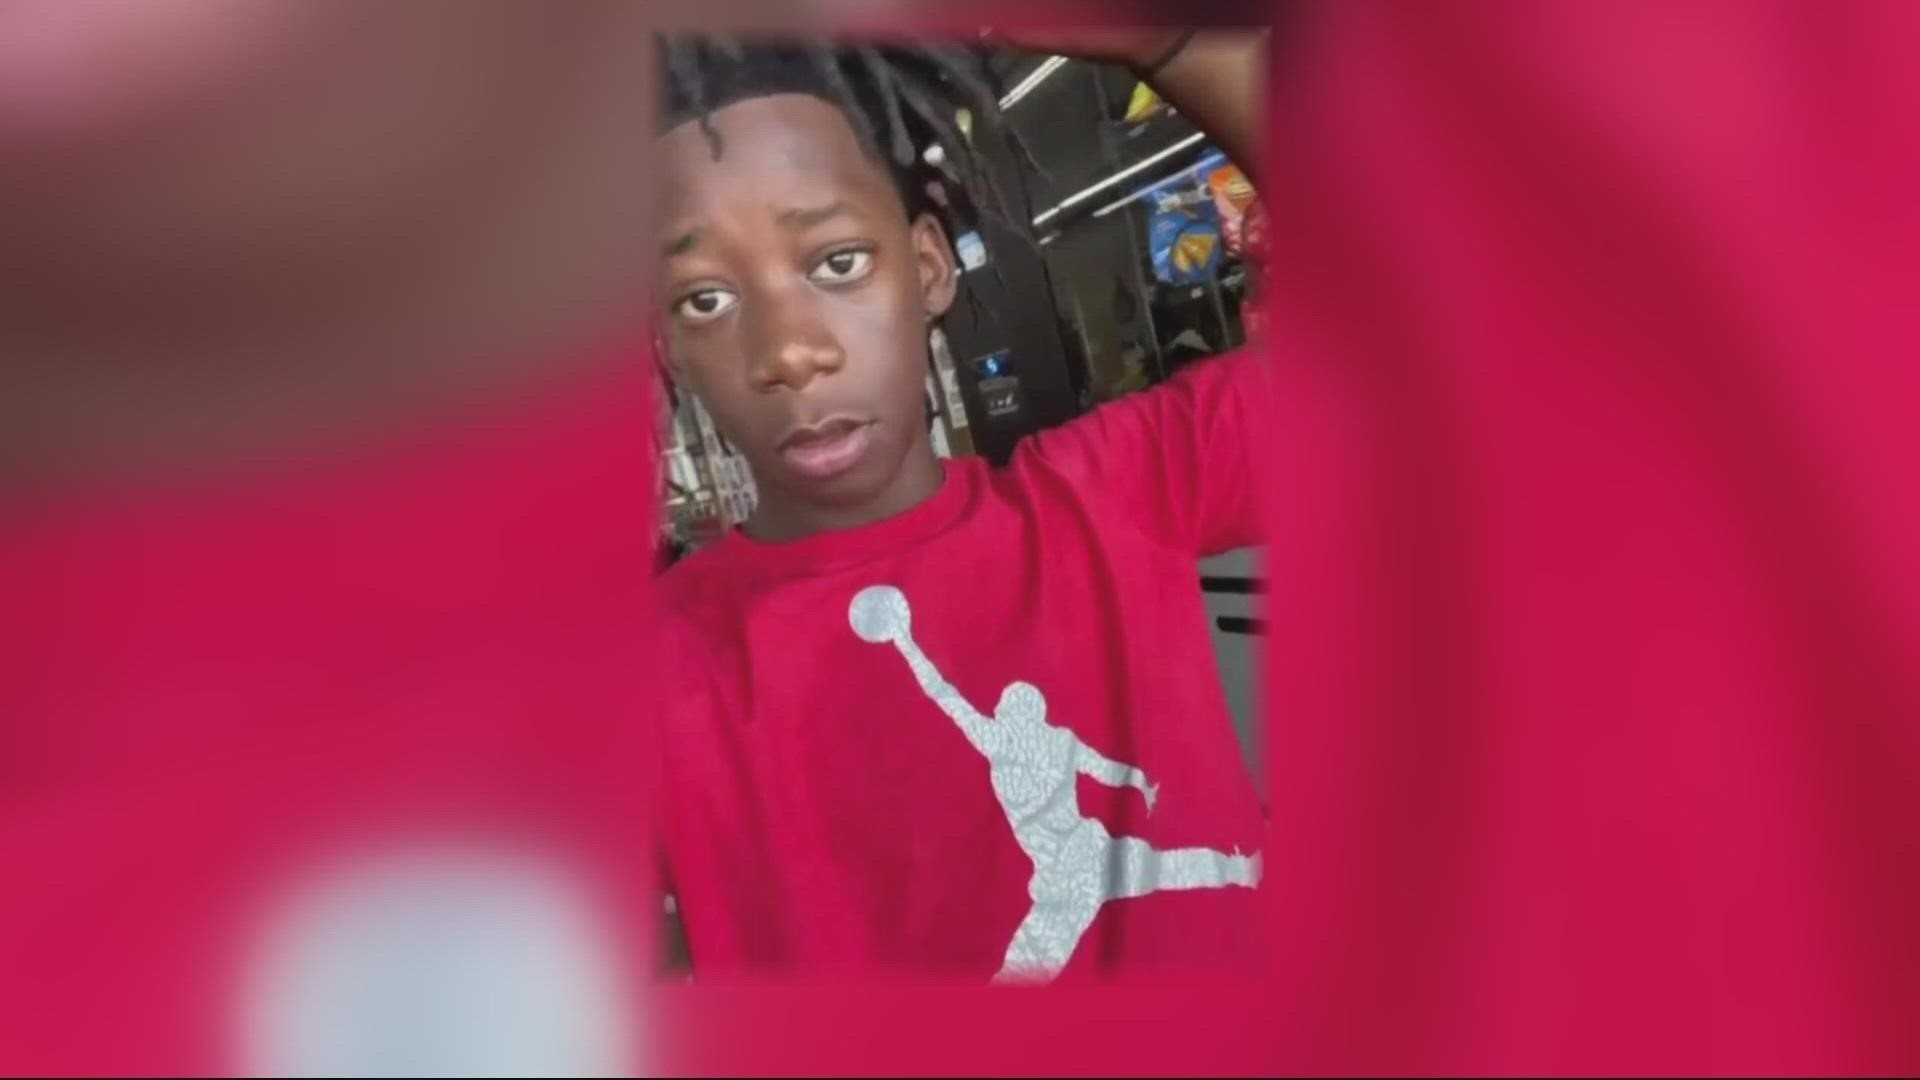 An arrest has been made in the shooting death of 13-year-old Prince Holland, who was killed Dec. 3 in a drive-by shooting in Moncrief.